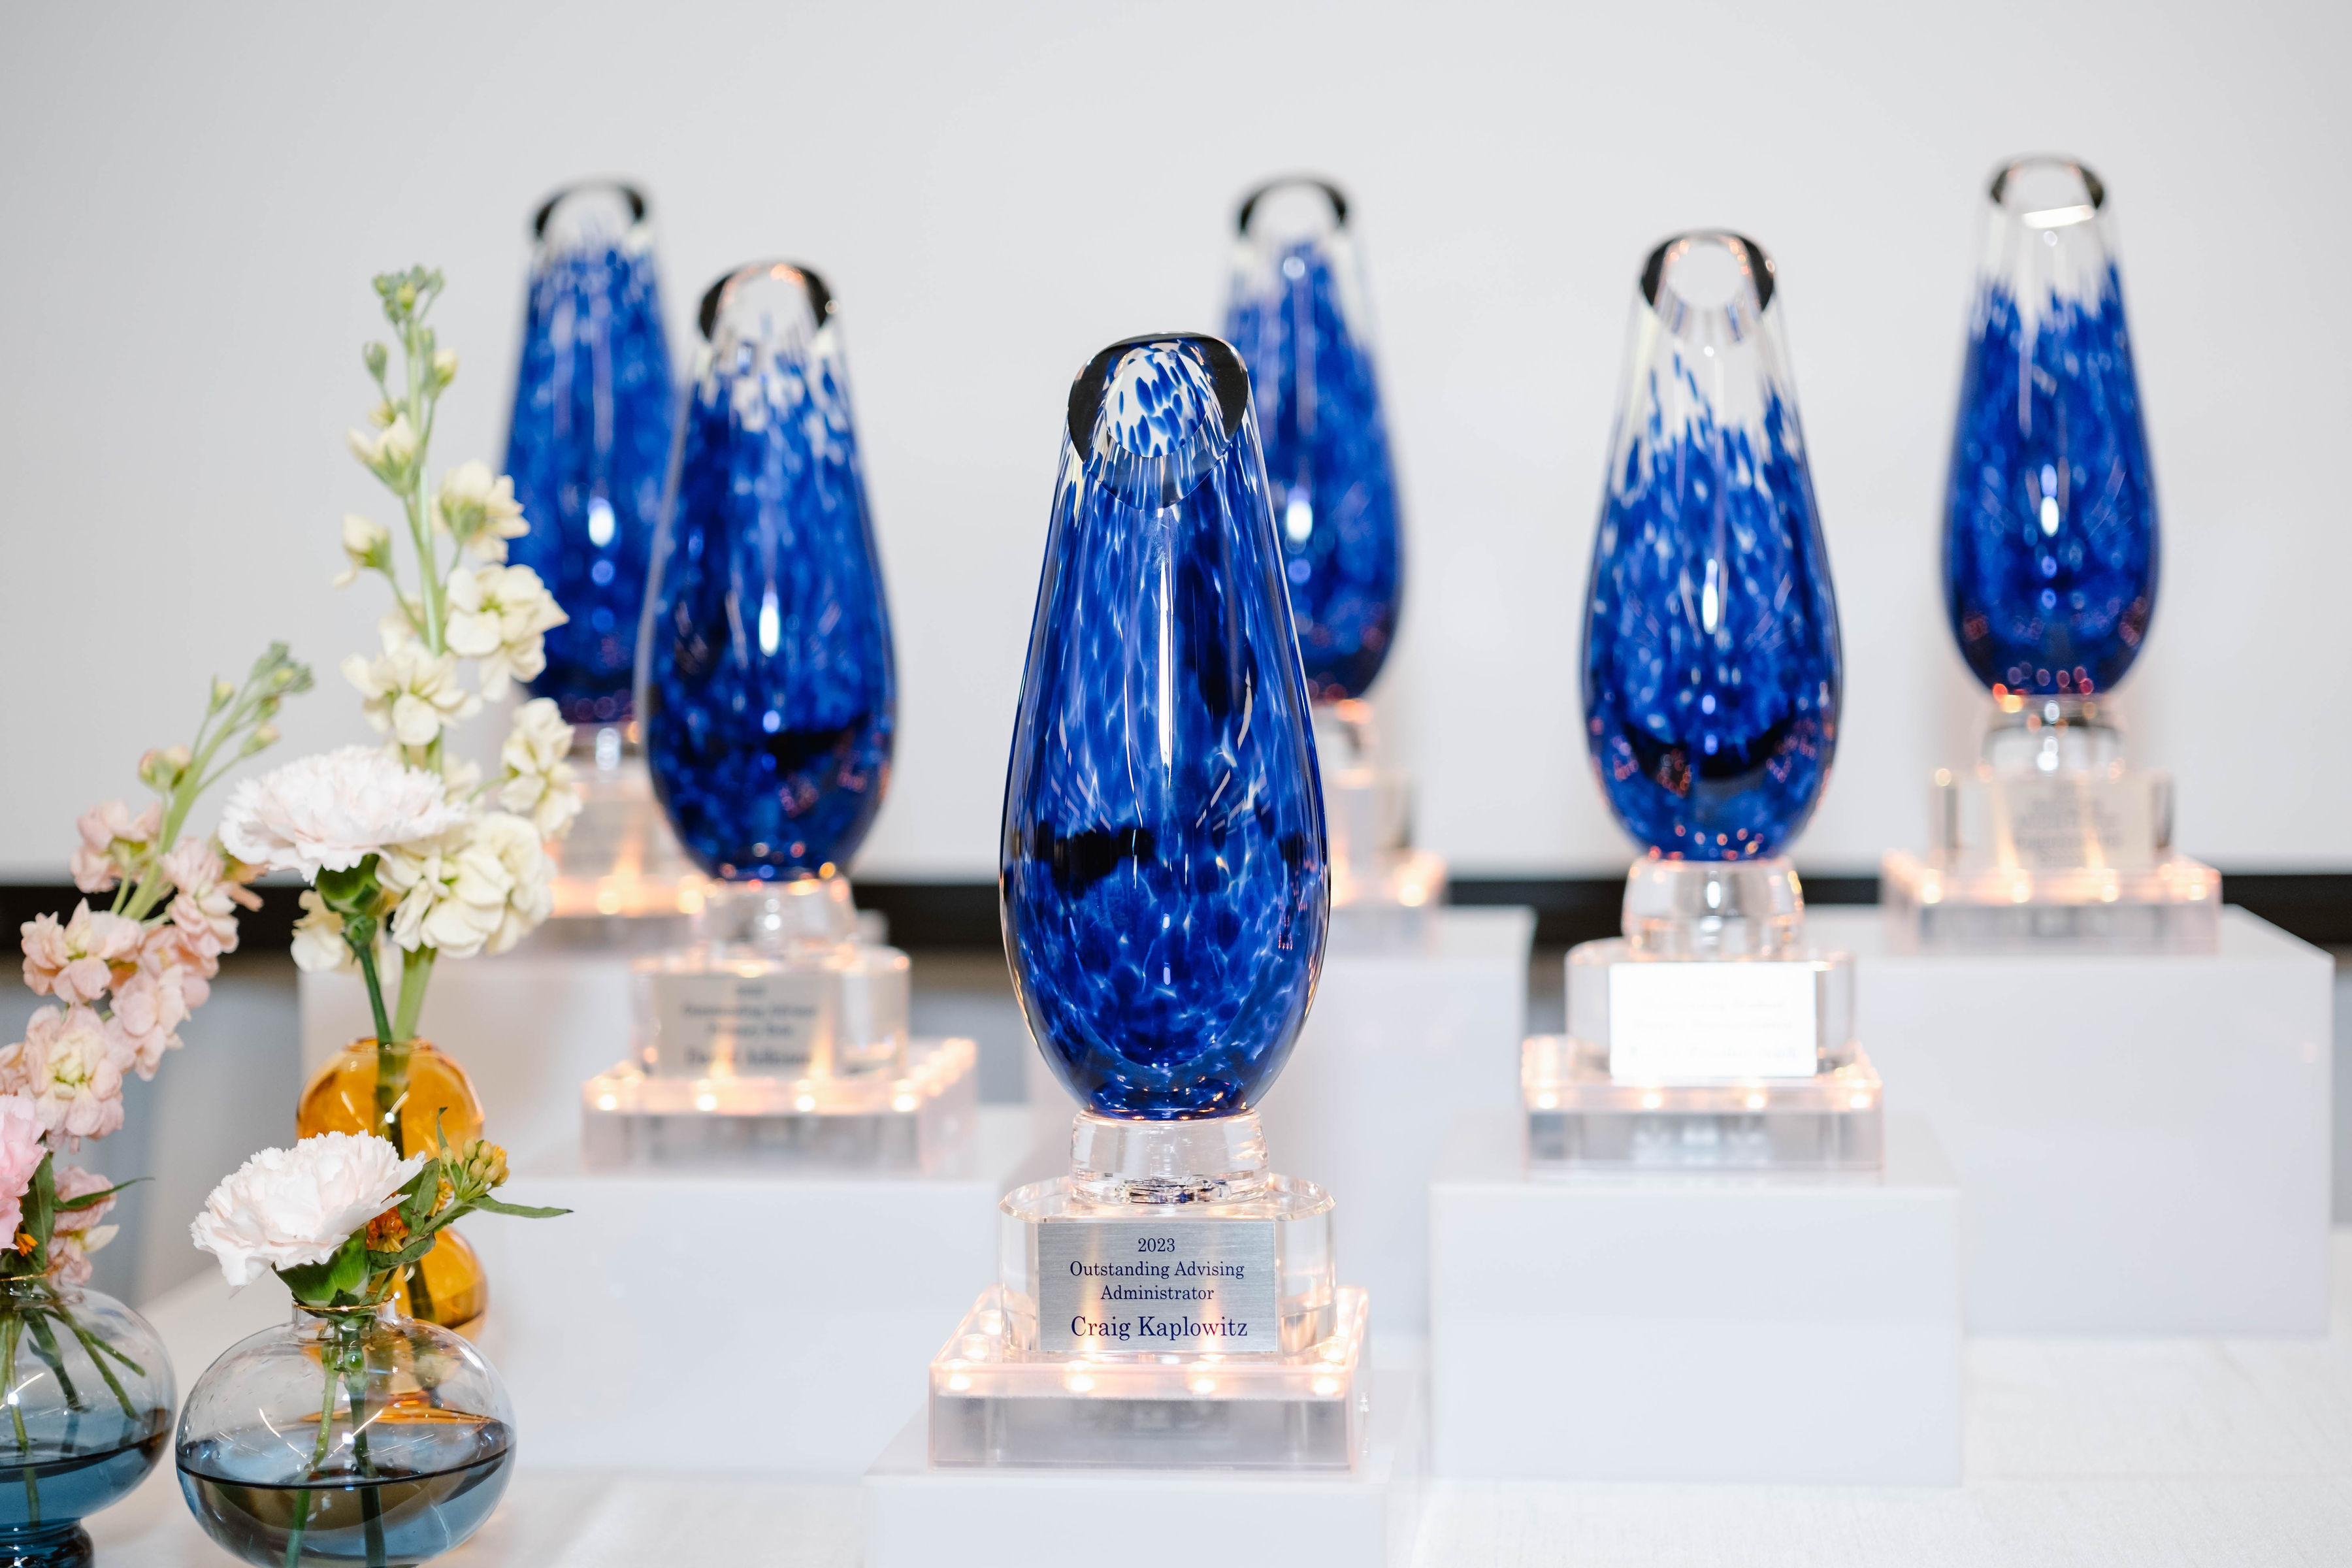 A photo of glass awards